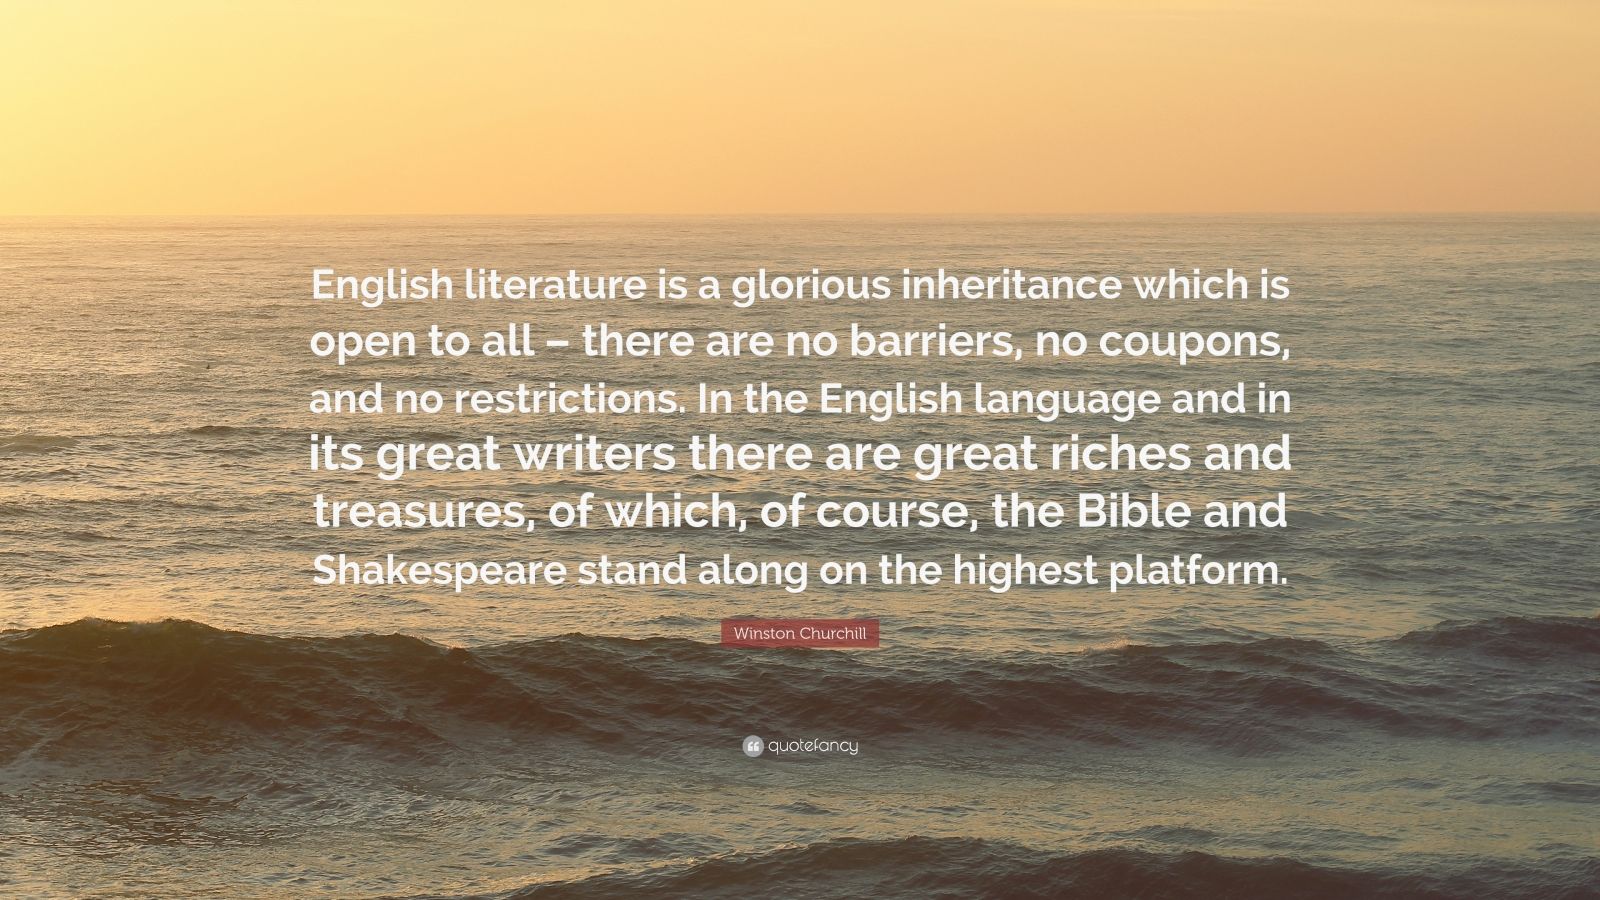 Winston Churchill Quote: “English literature is a glorious inheritance